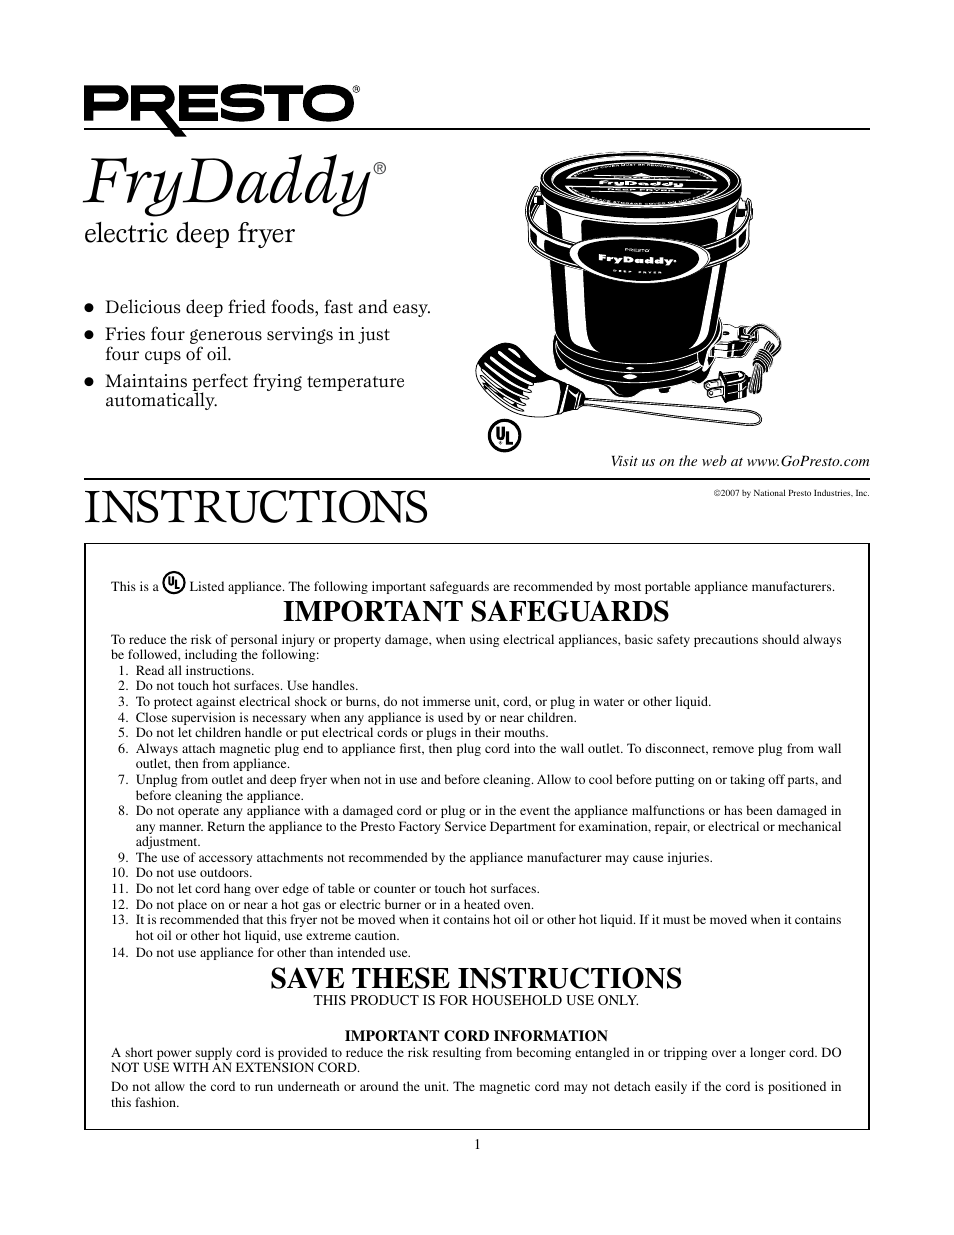 Instruction Manual for the Presto<sup>®</sup> GranPappy<sup>®</sup> deep  fryer - Deep Fryers - Presto®